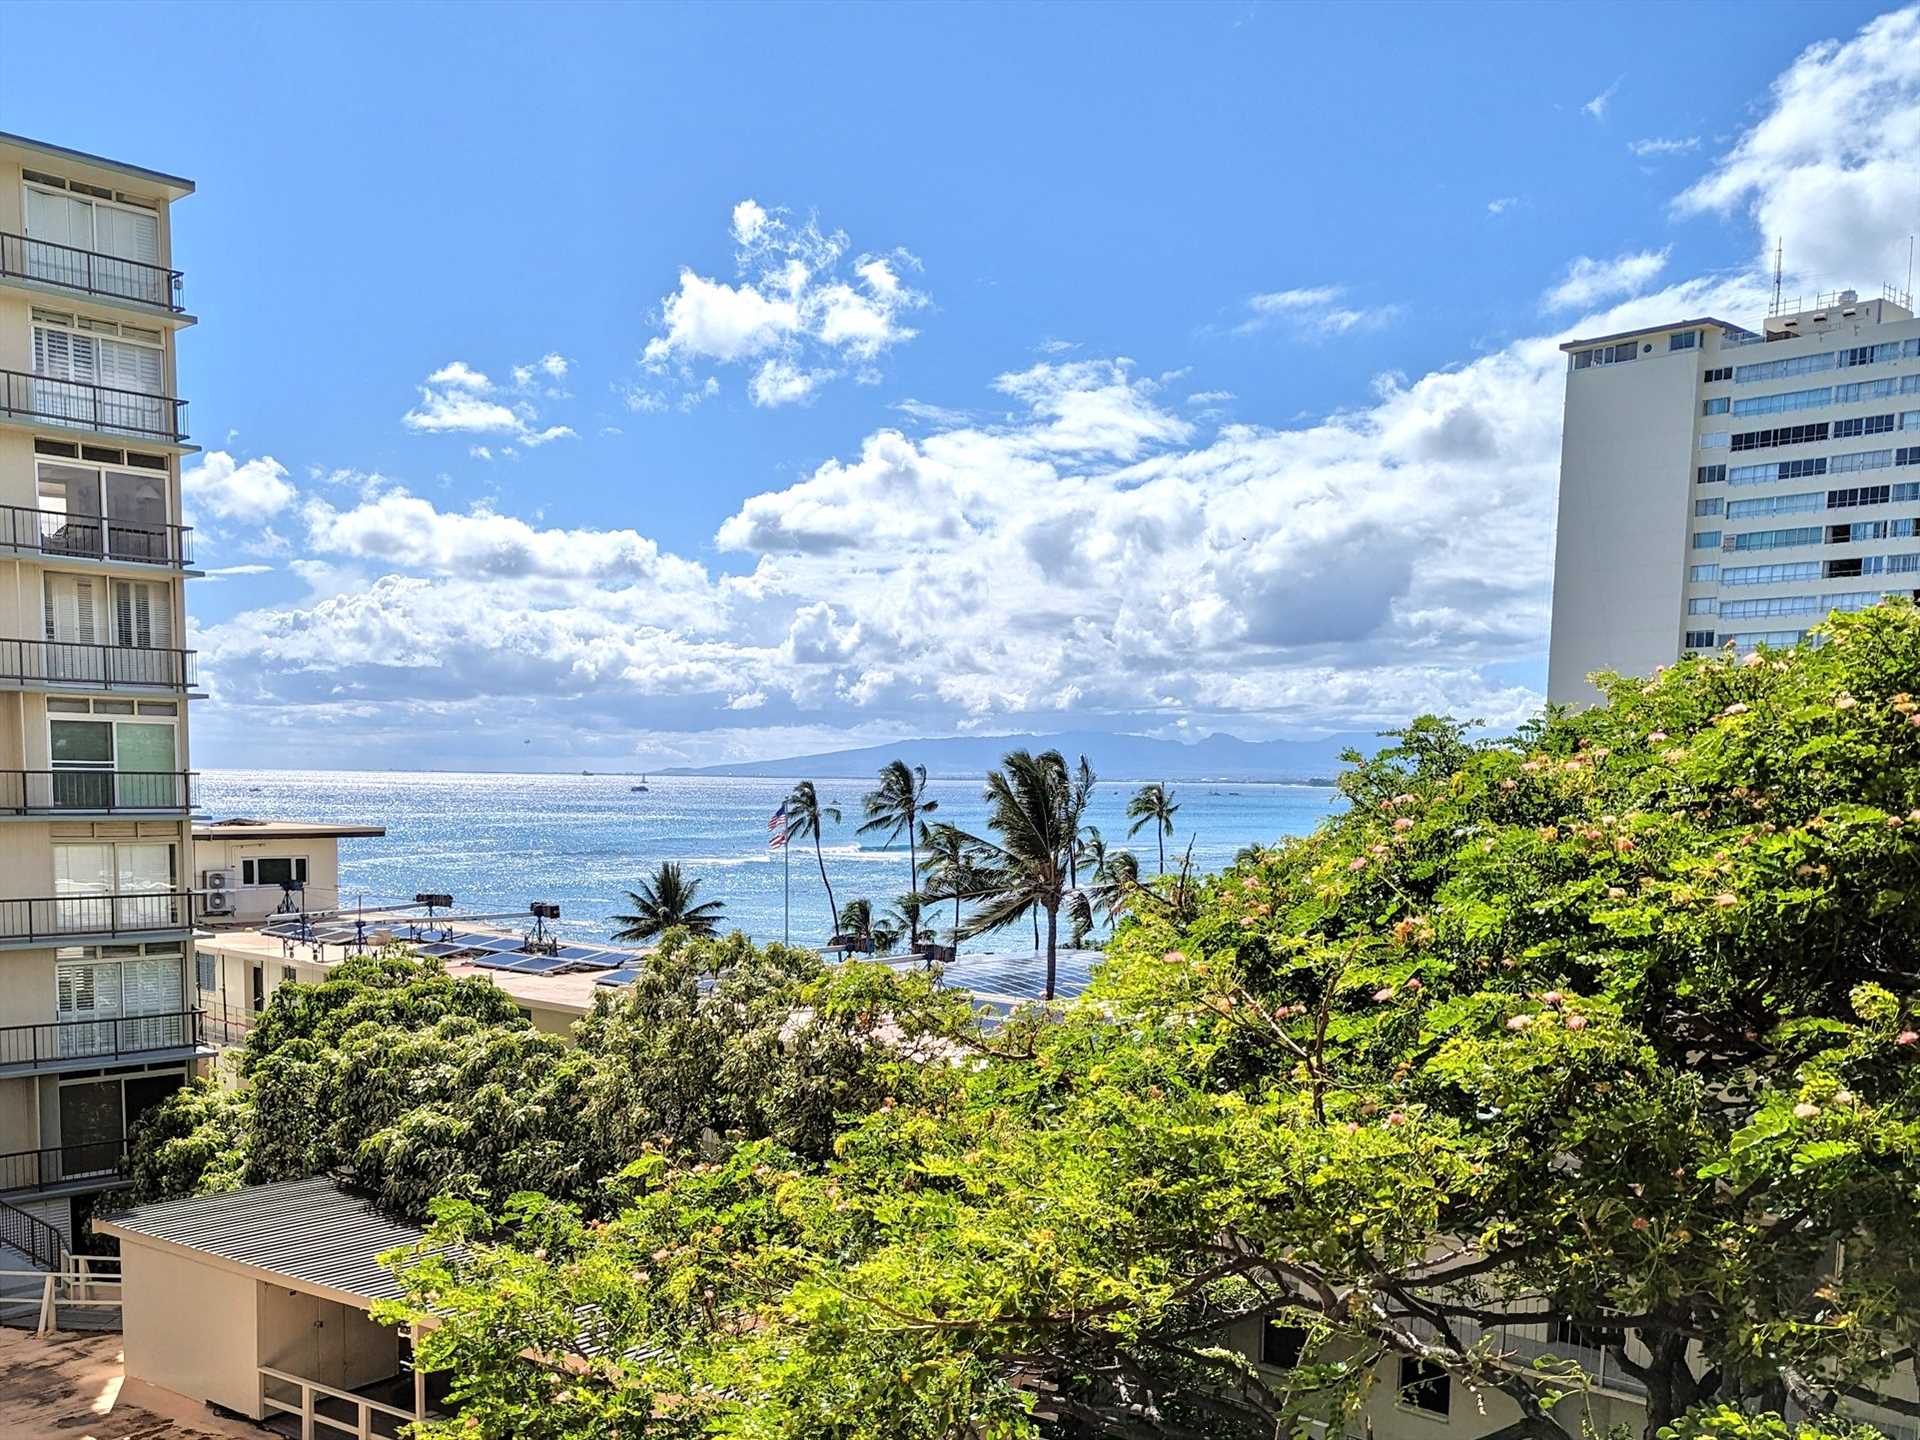 Ocean view from the lanai